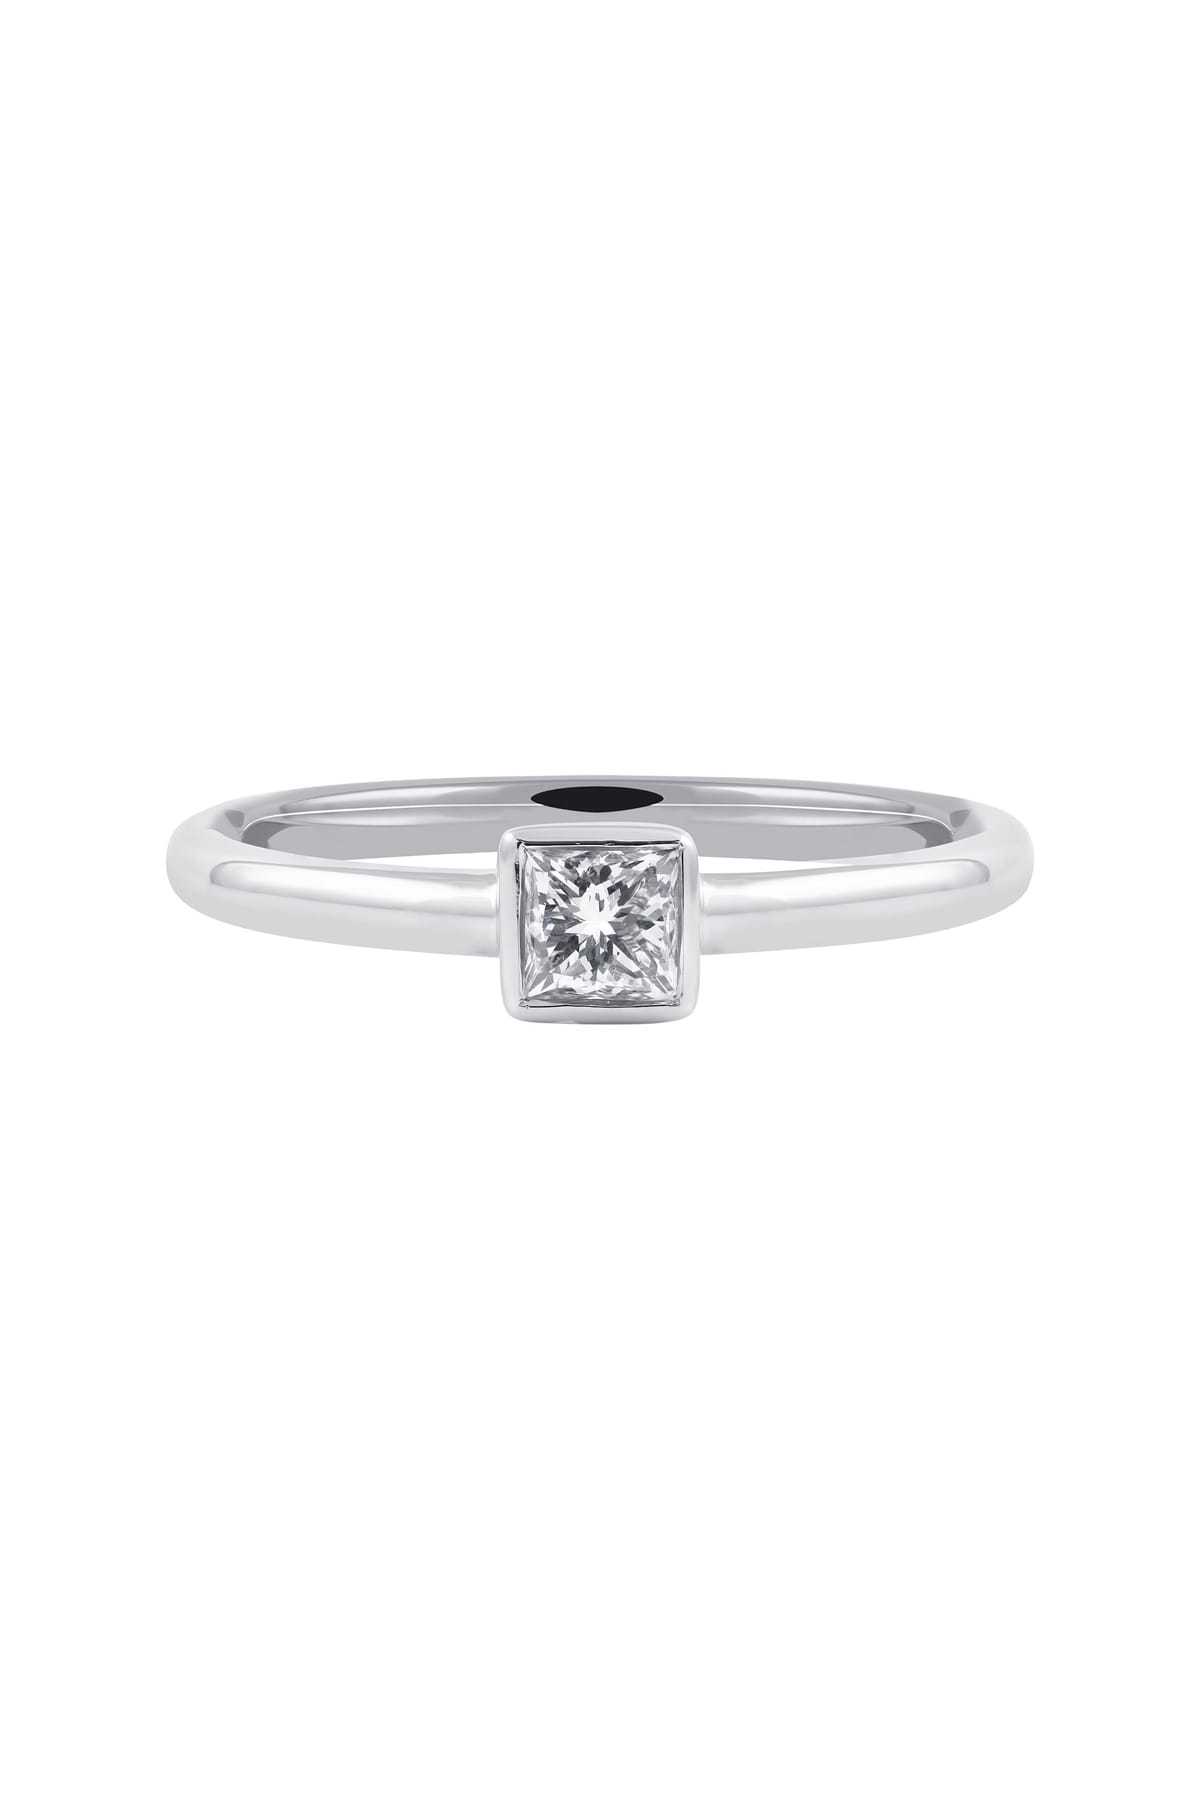 Princess Cut Bezel Set Diamond Solitaire Ring set in 18ct White Gold available at LeGassick Diamonds and Jewellery Gold Coast, Australia.